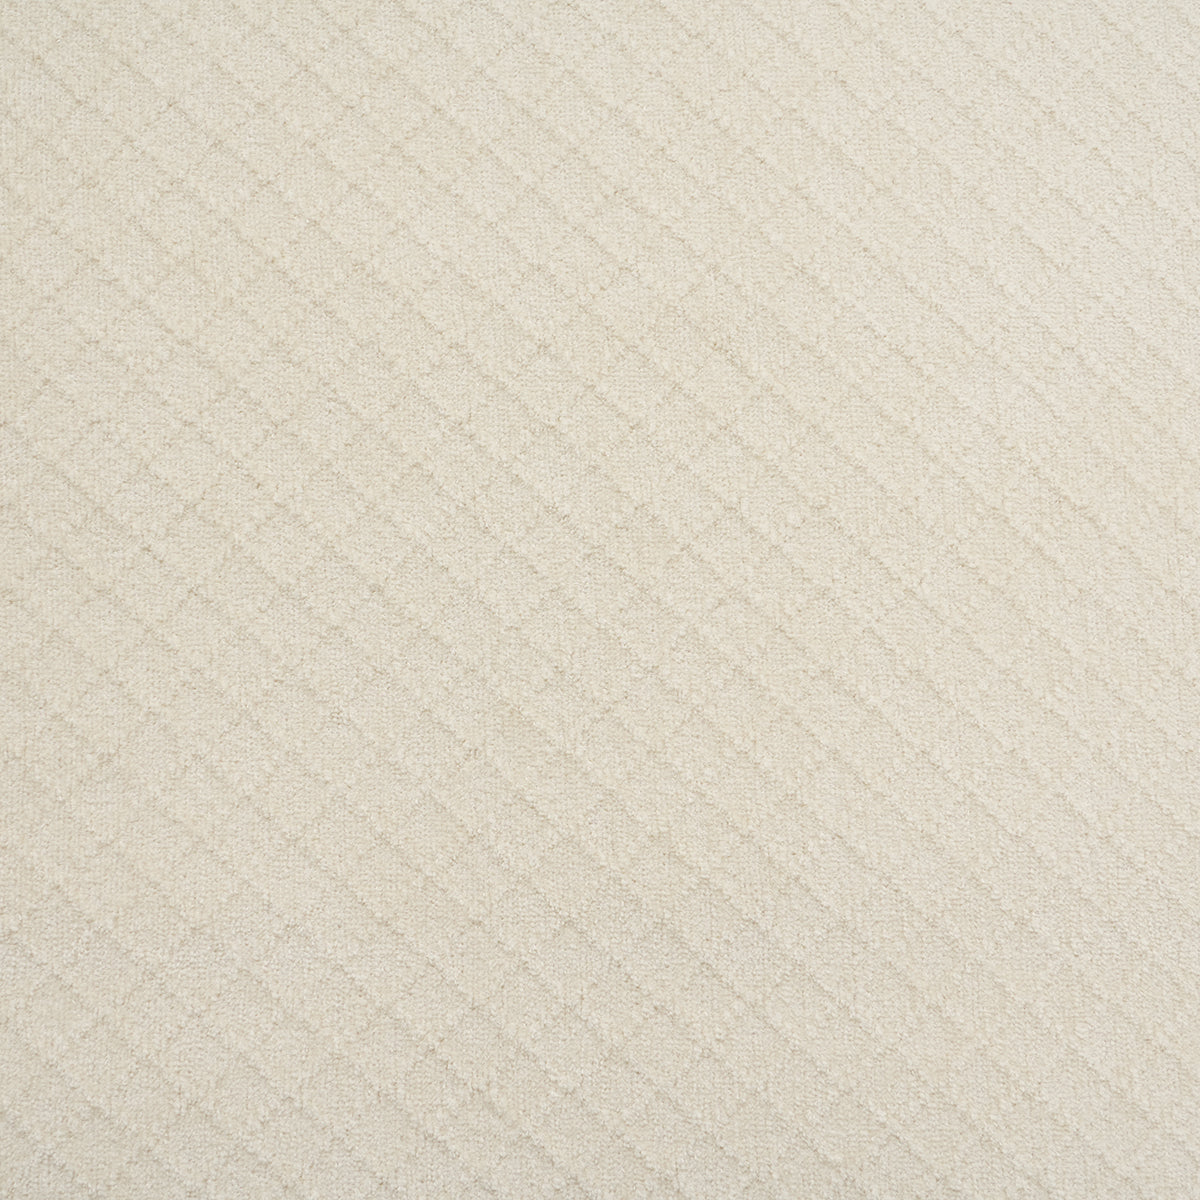 Blaize 100% Cotton Solid Weave Beige Bed Cover